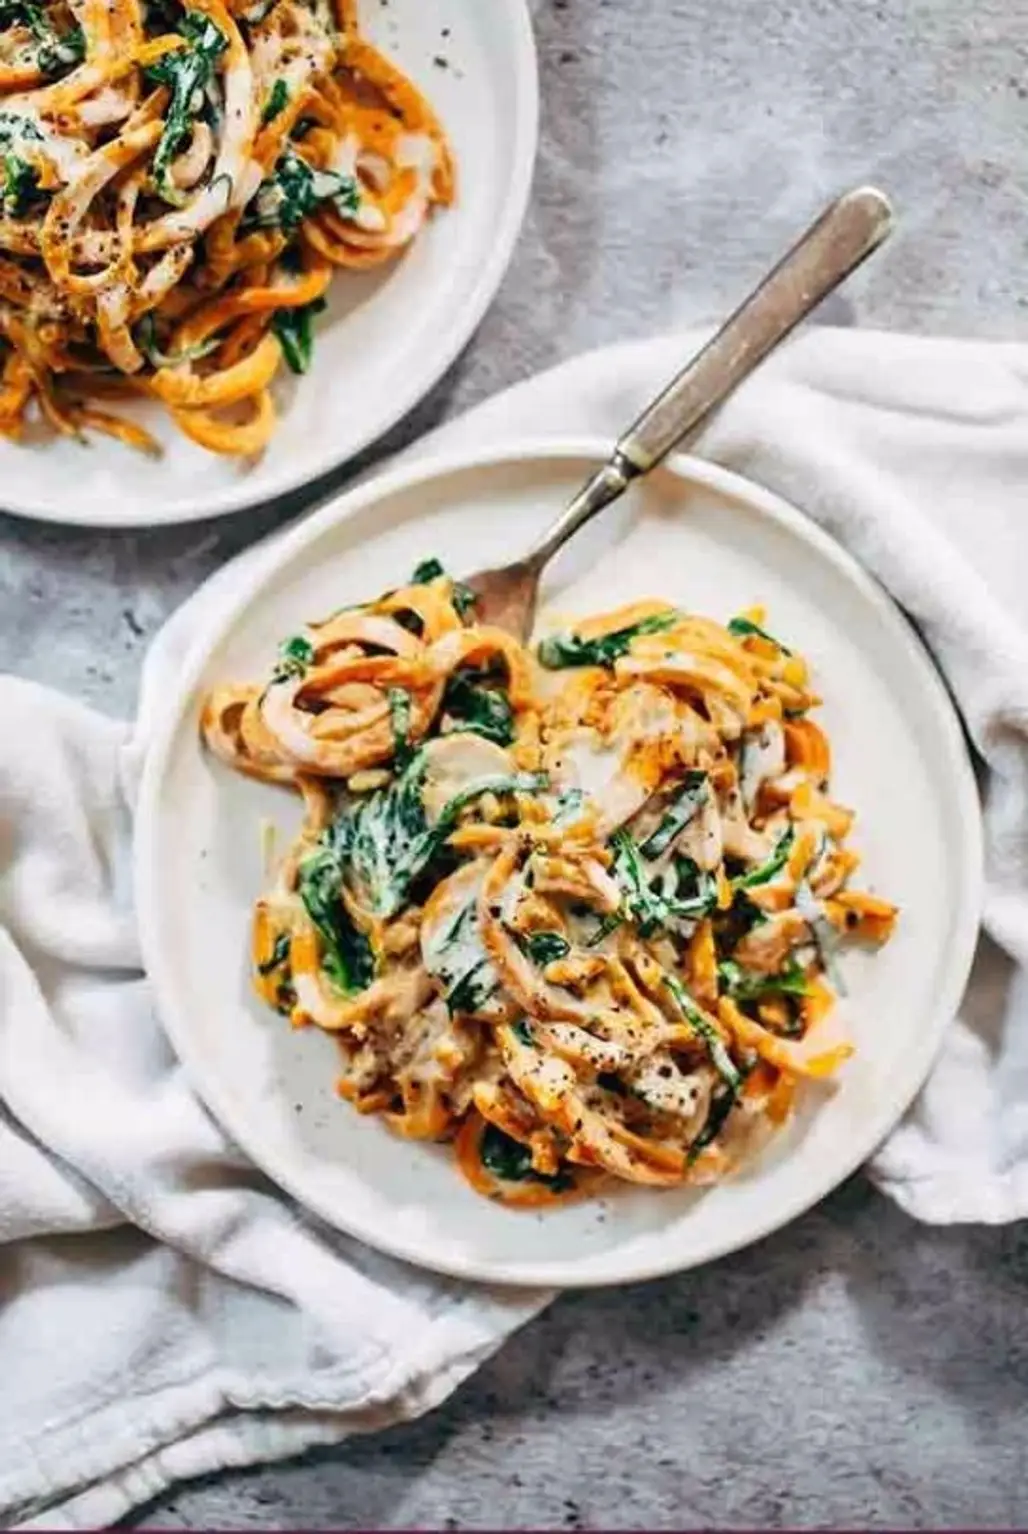 Creamy Spinach Sweet Potato Noodles with Cashew Sauce